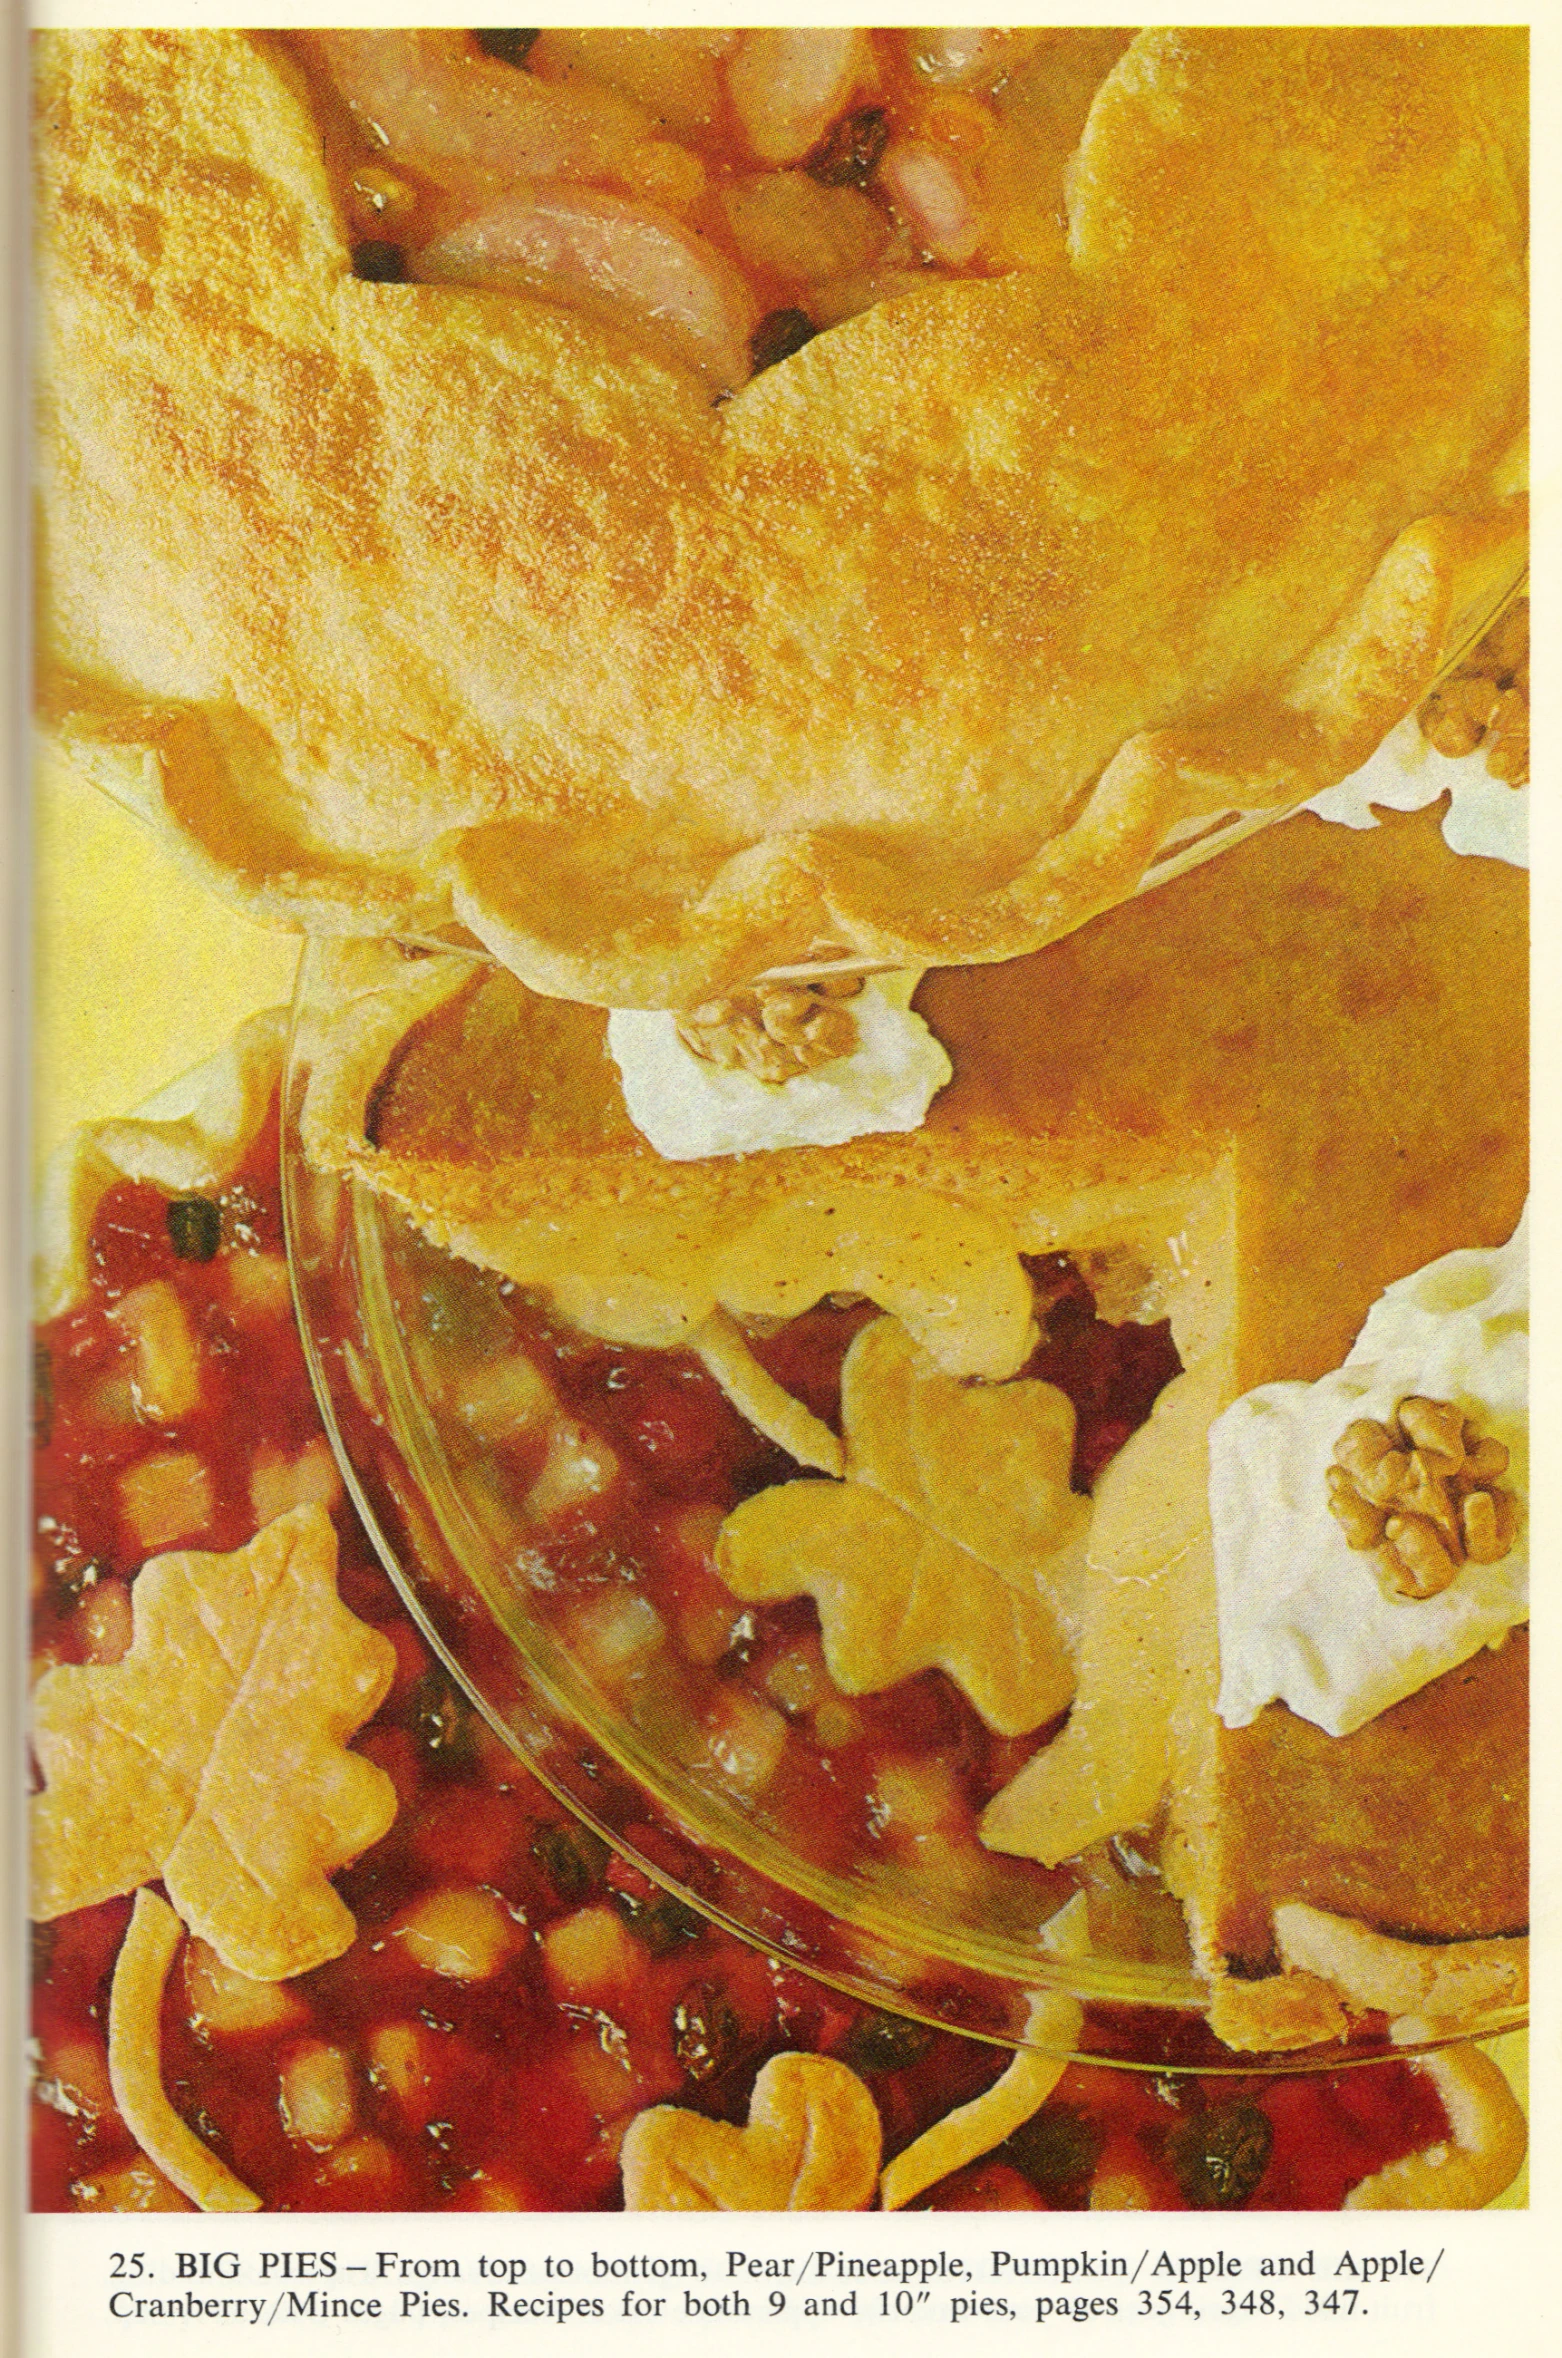 a magazine article features an image of pastries in a dish